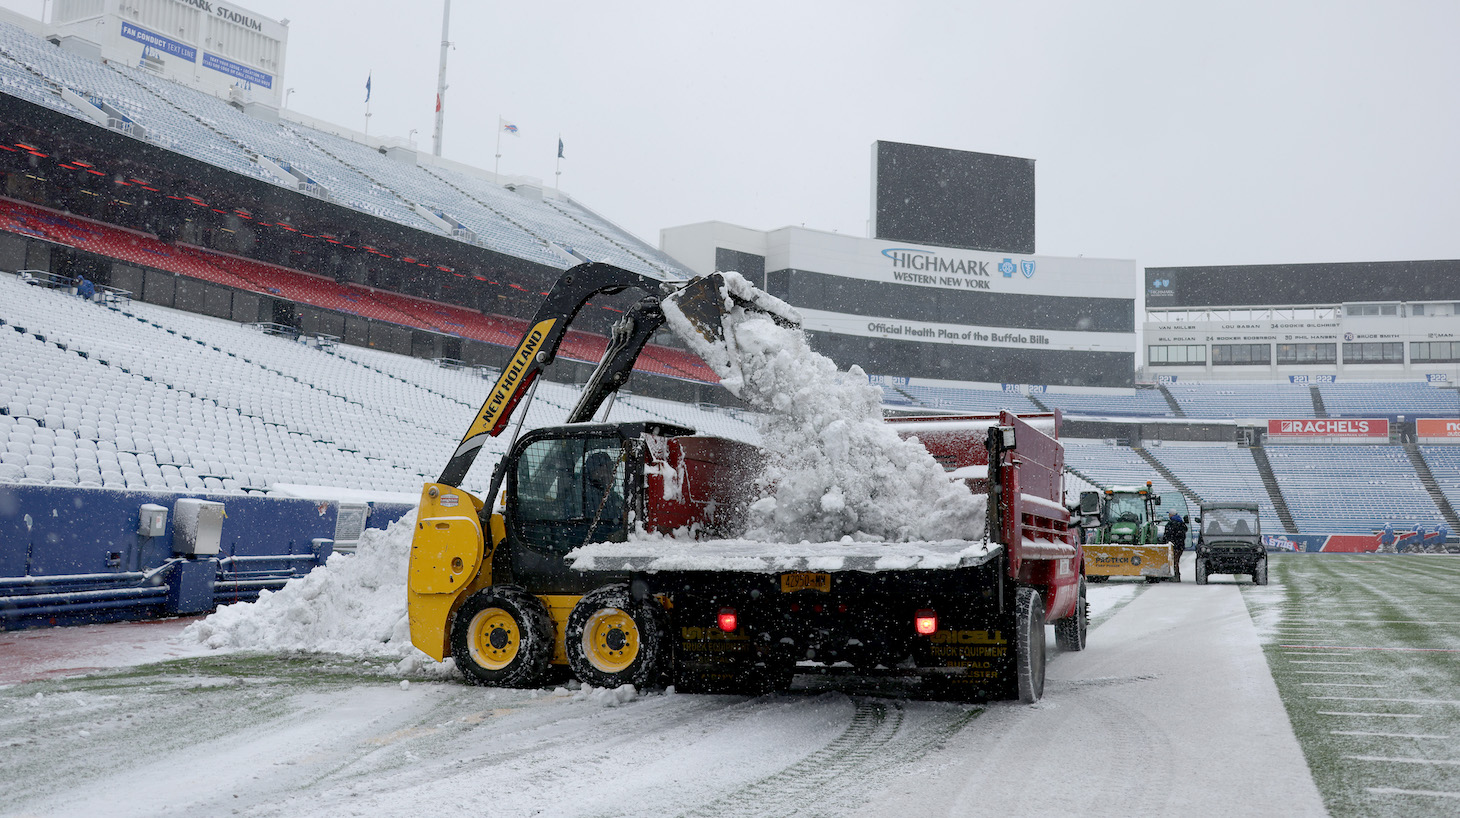 A snow plow clears the field of snow before the start of a game between the Atlanta Falcons and the Buffalo Bills at Highmark Stadium on January 02, 2022 in Orchard Park, New York.